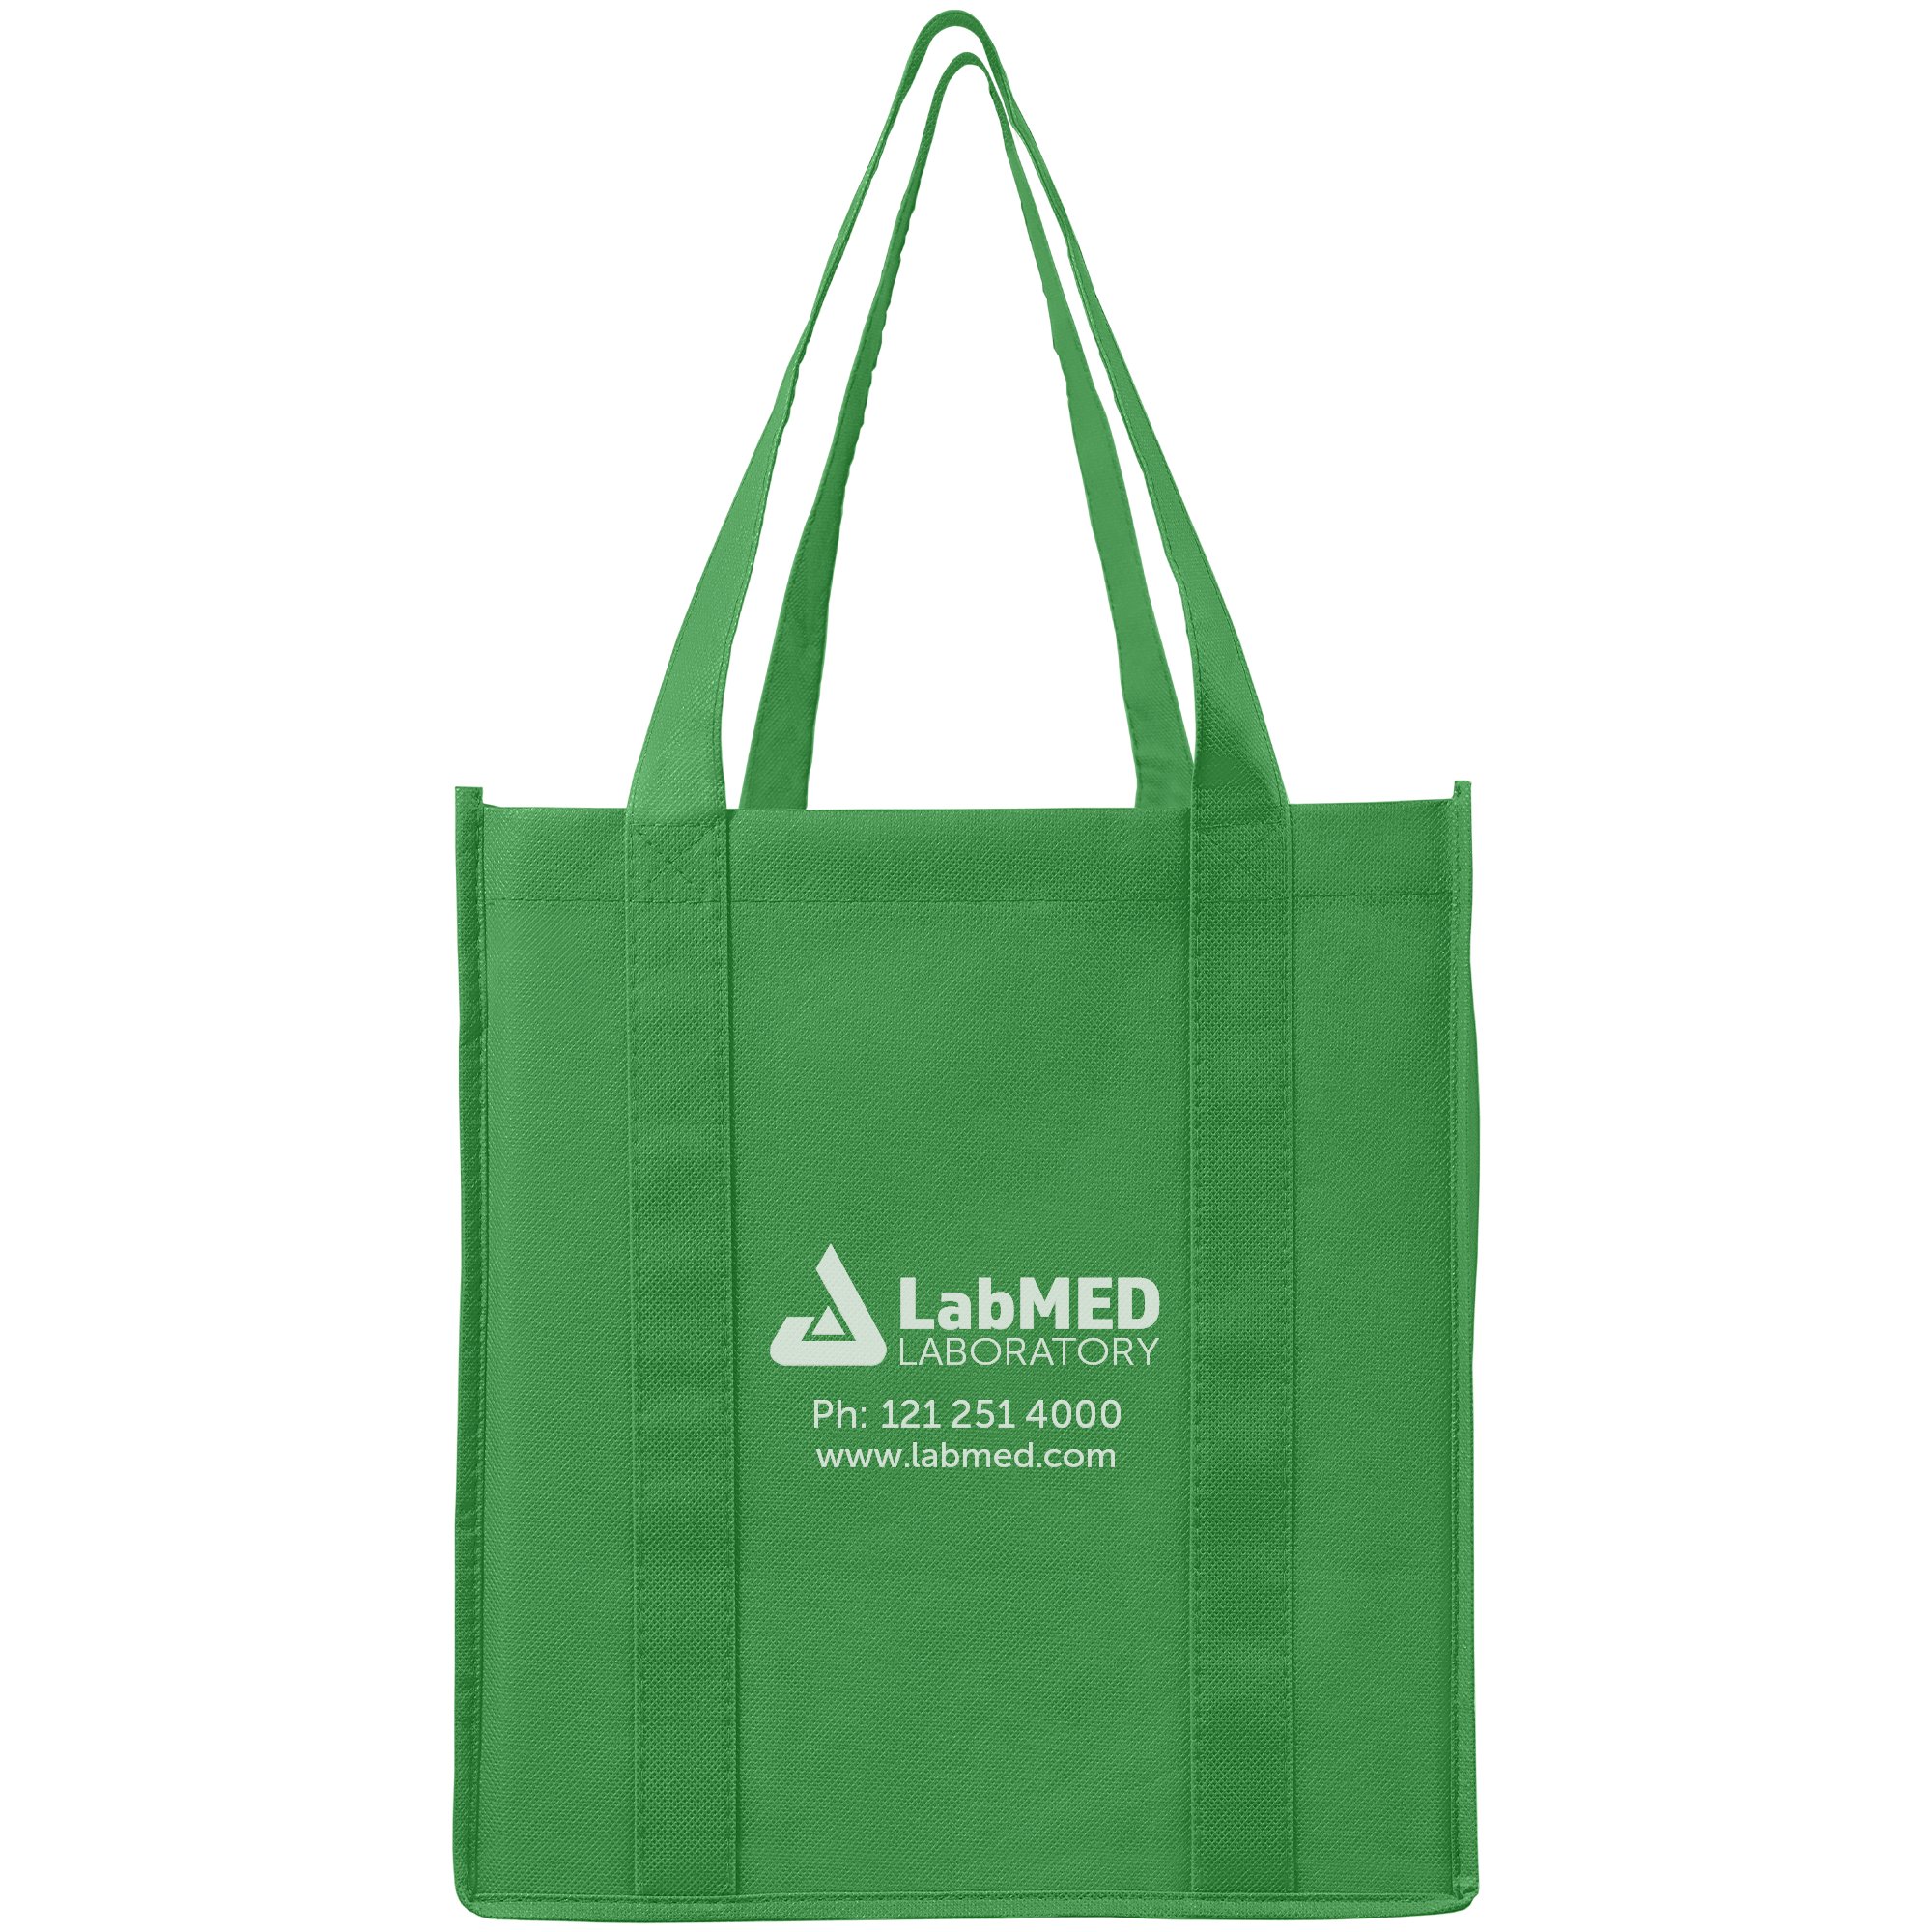 Promotional Large Reusable Shopping Tote with Company Logo | National Pen